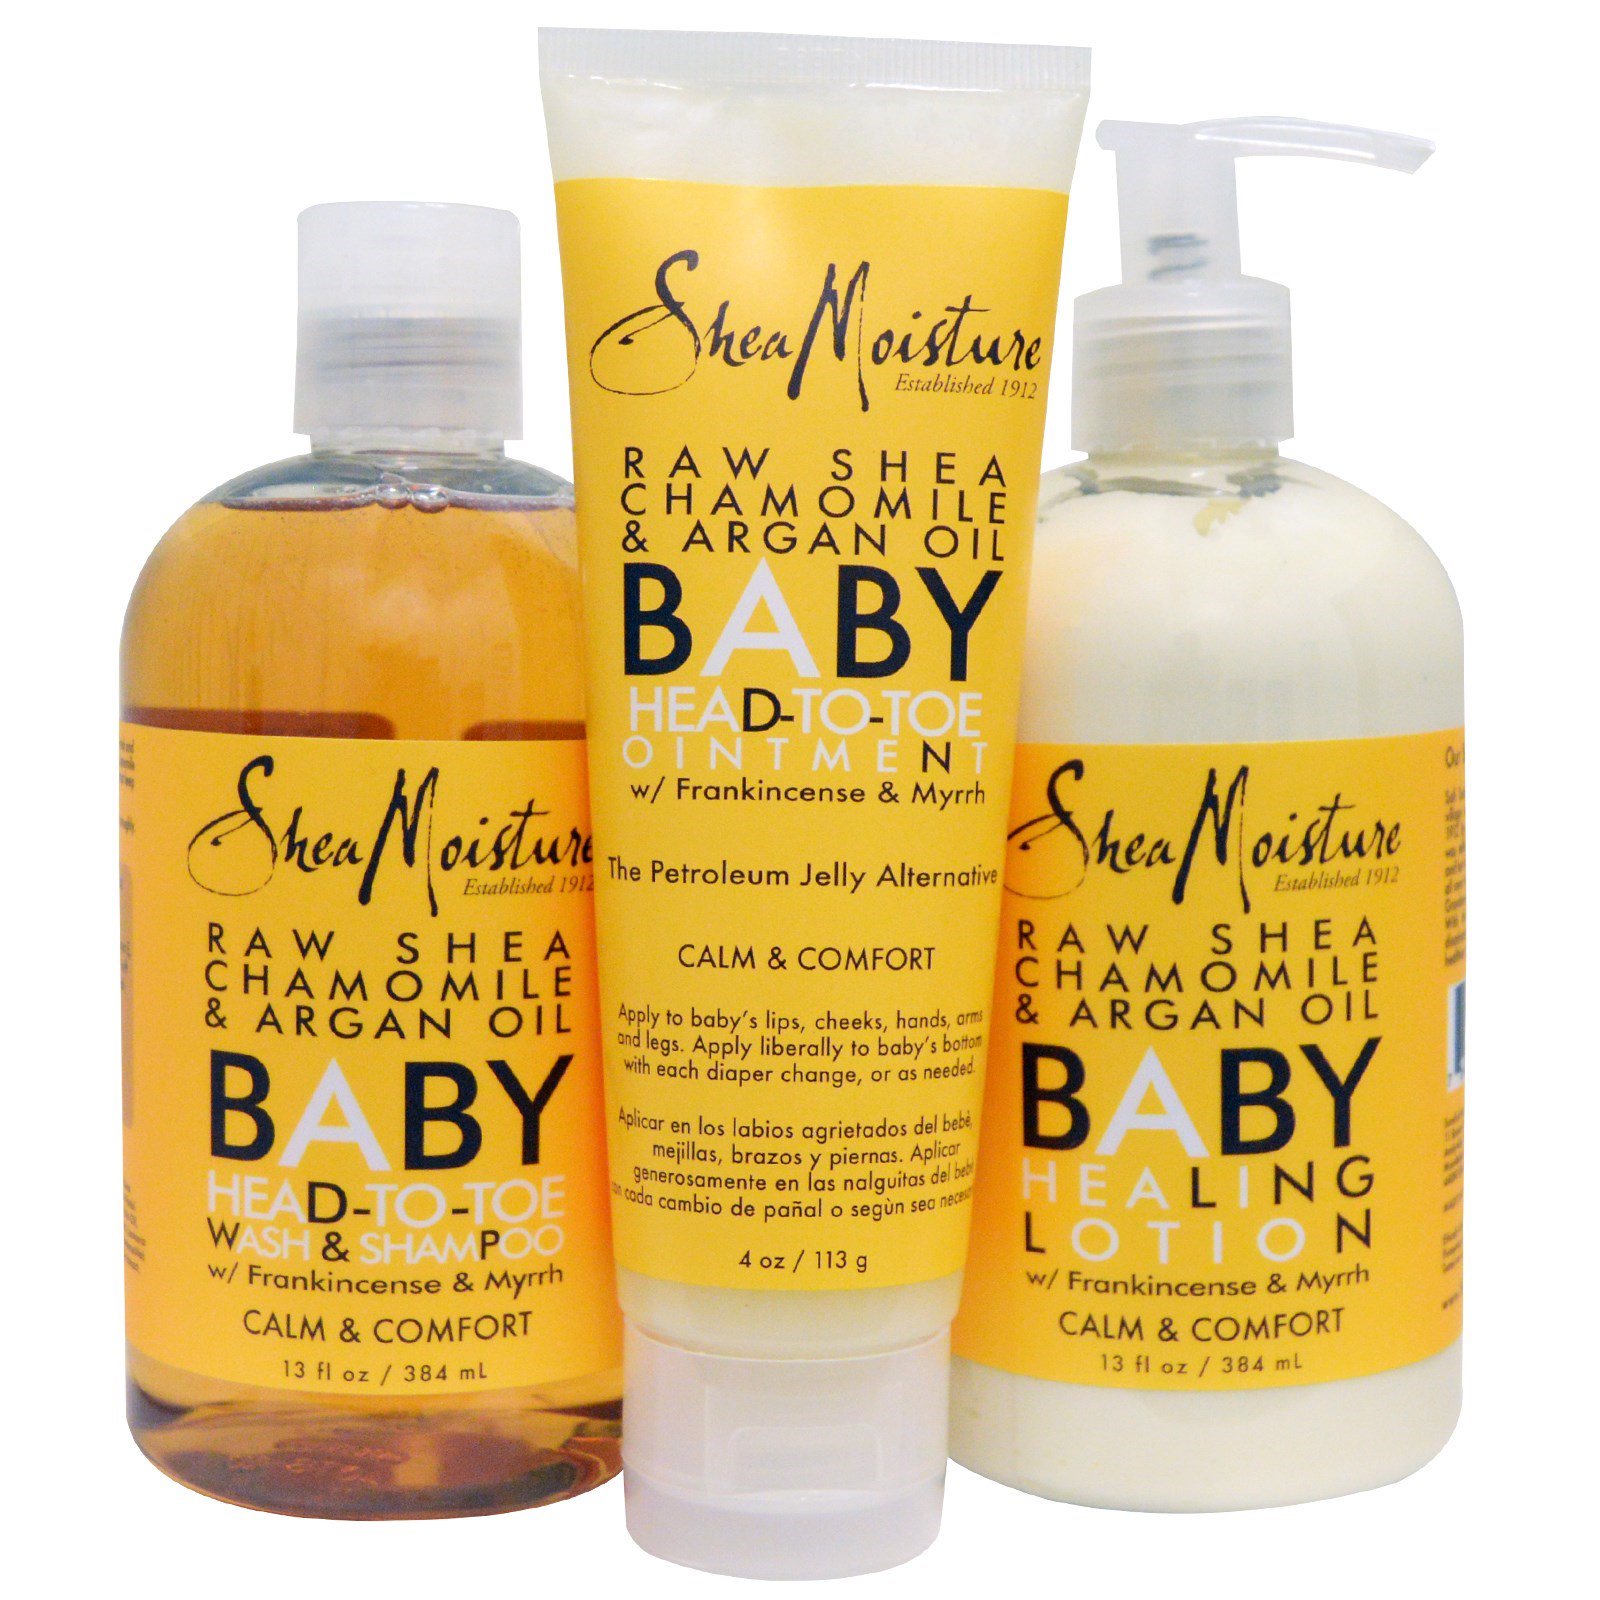 shea moisture baby hair products